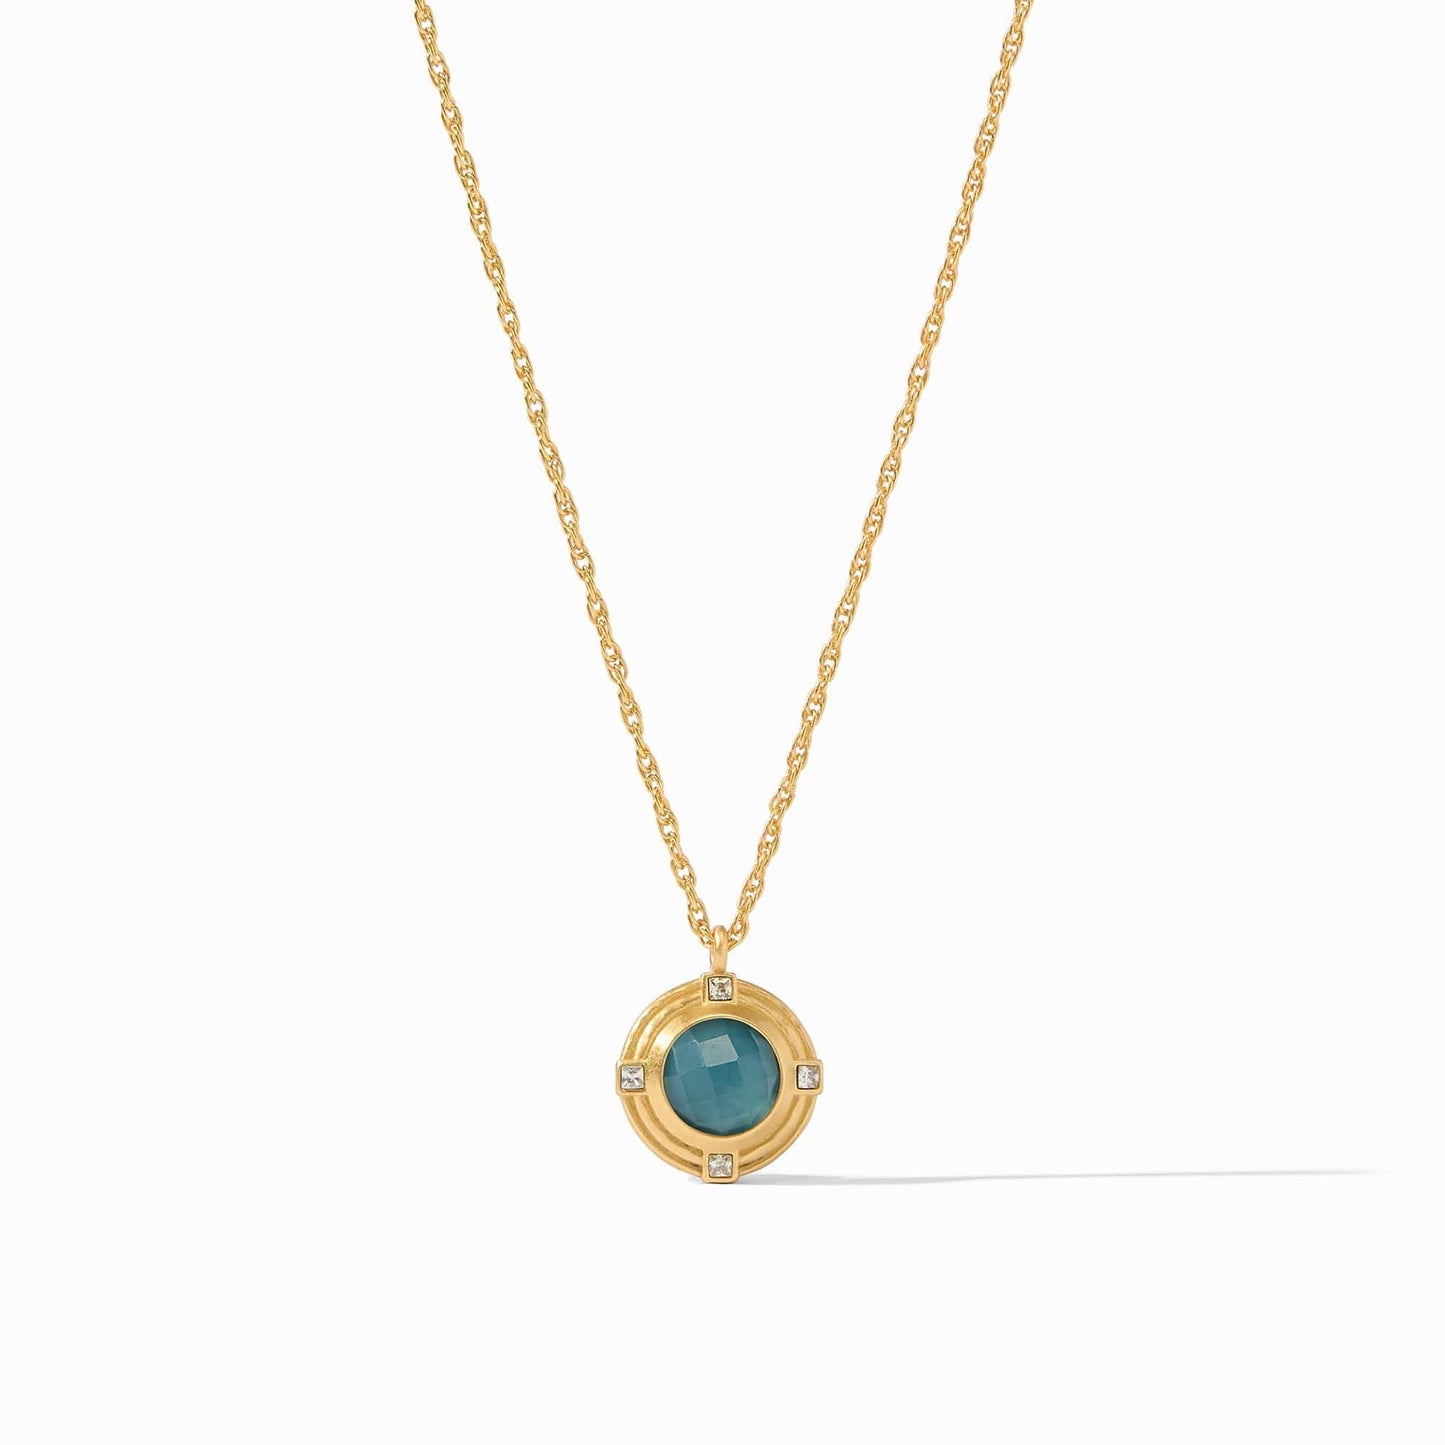 NKL-GPL Astor Solitaire Necklace in Iridescent Peacock Blue